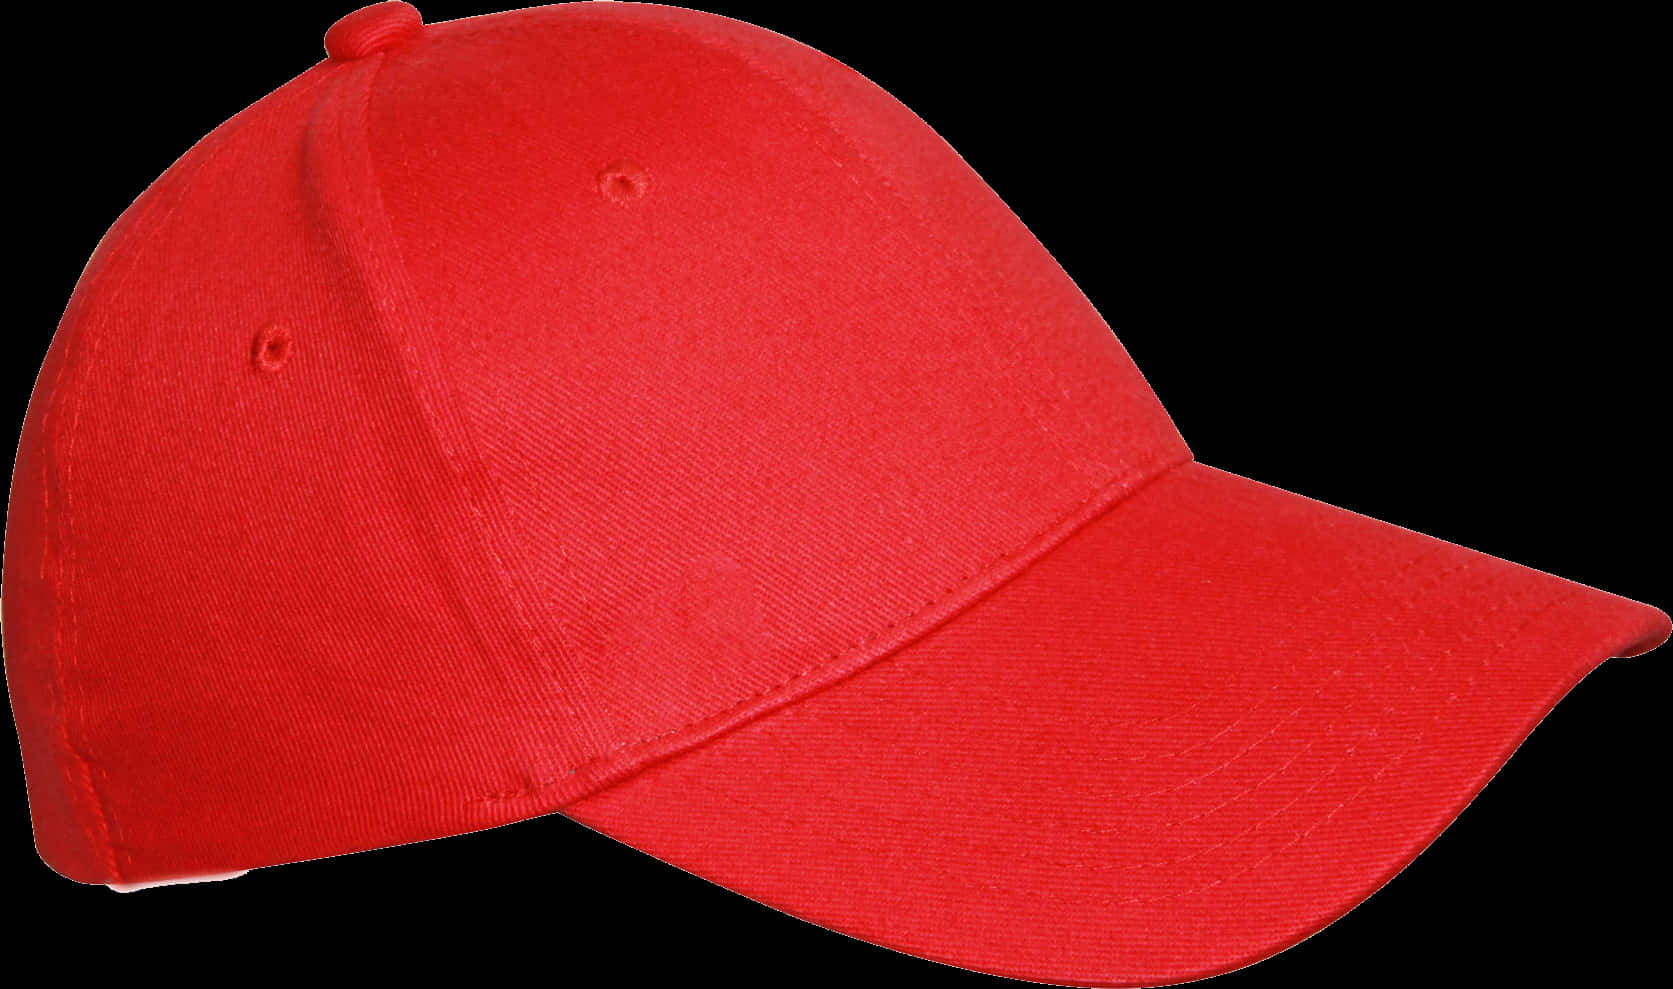 Red Baseball Cap Isolated PNG image